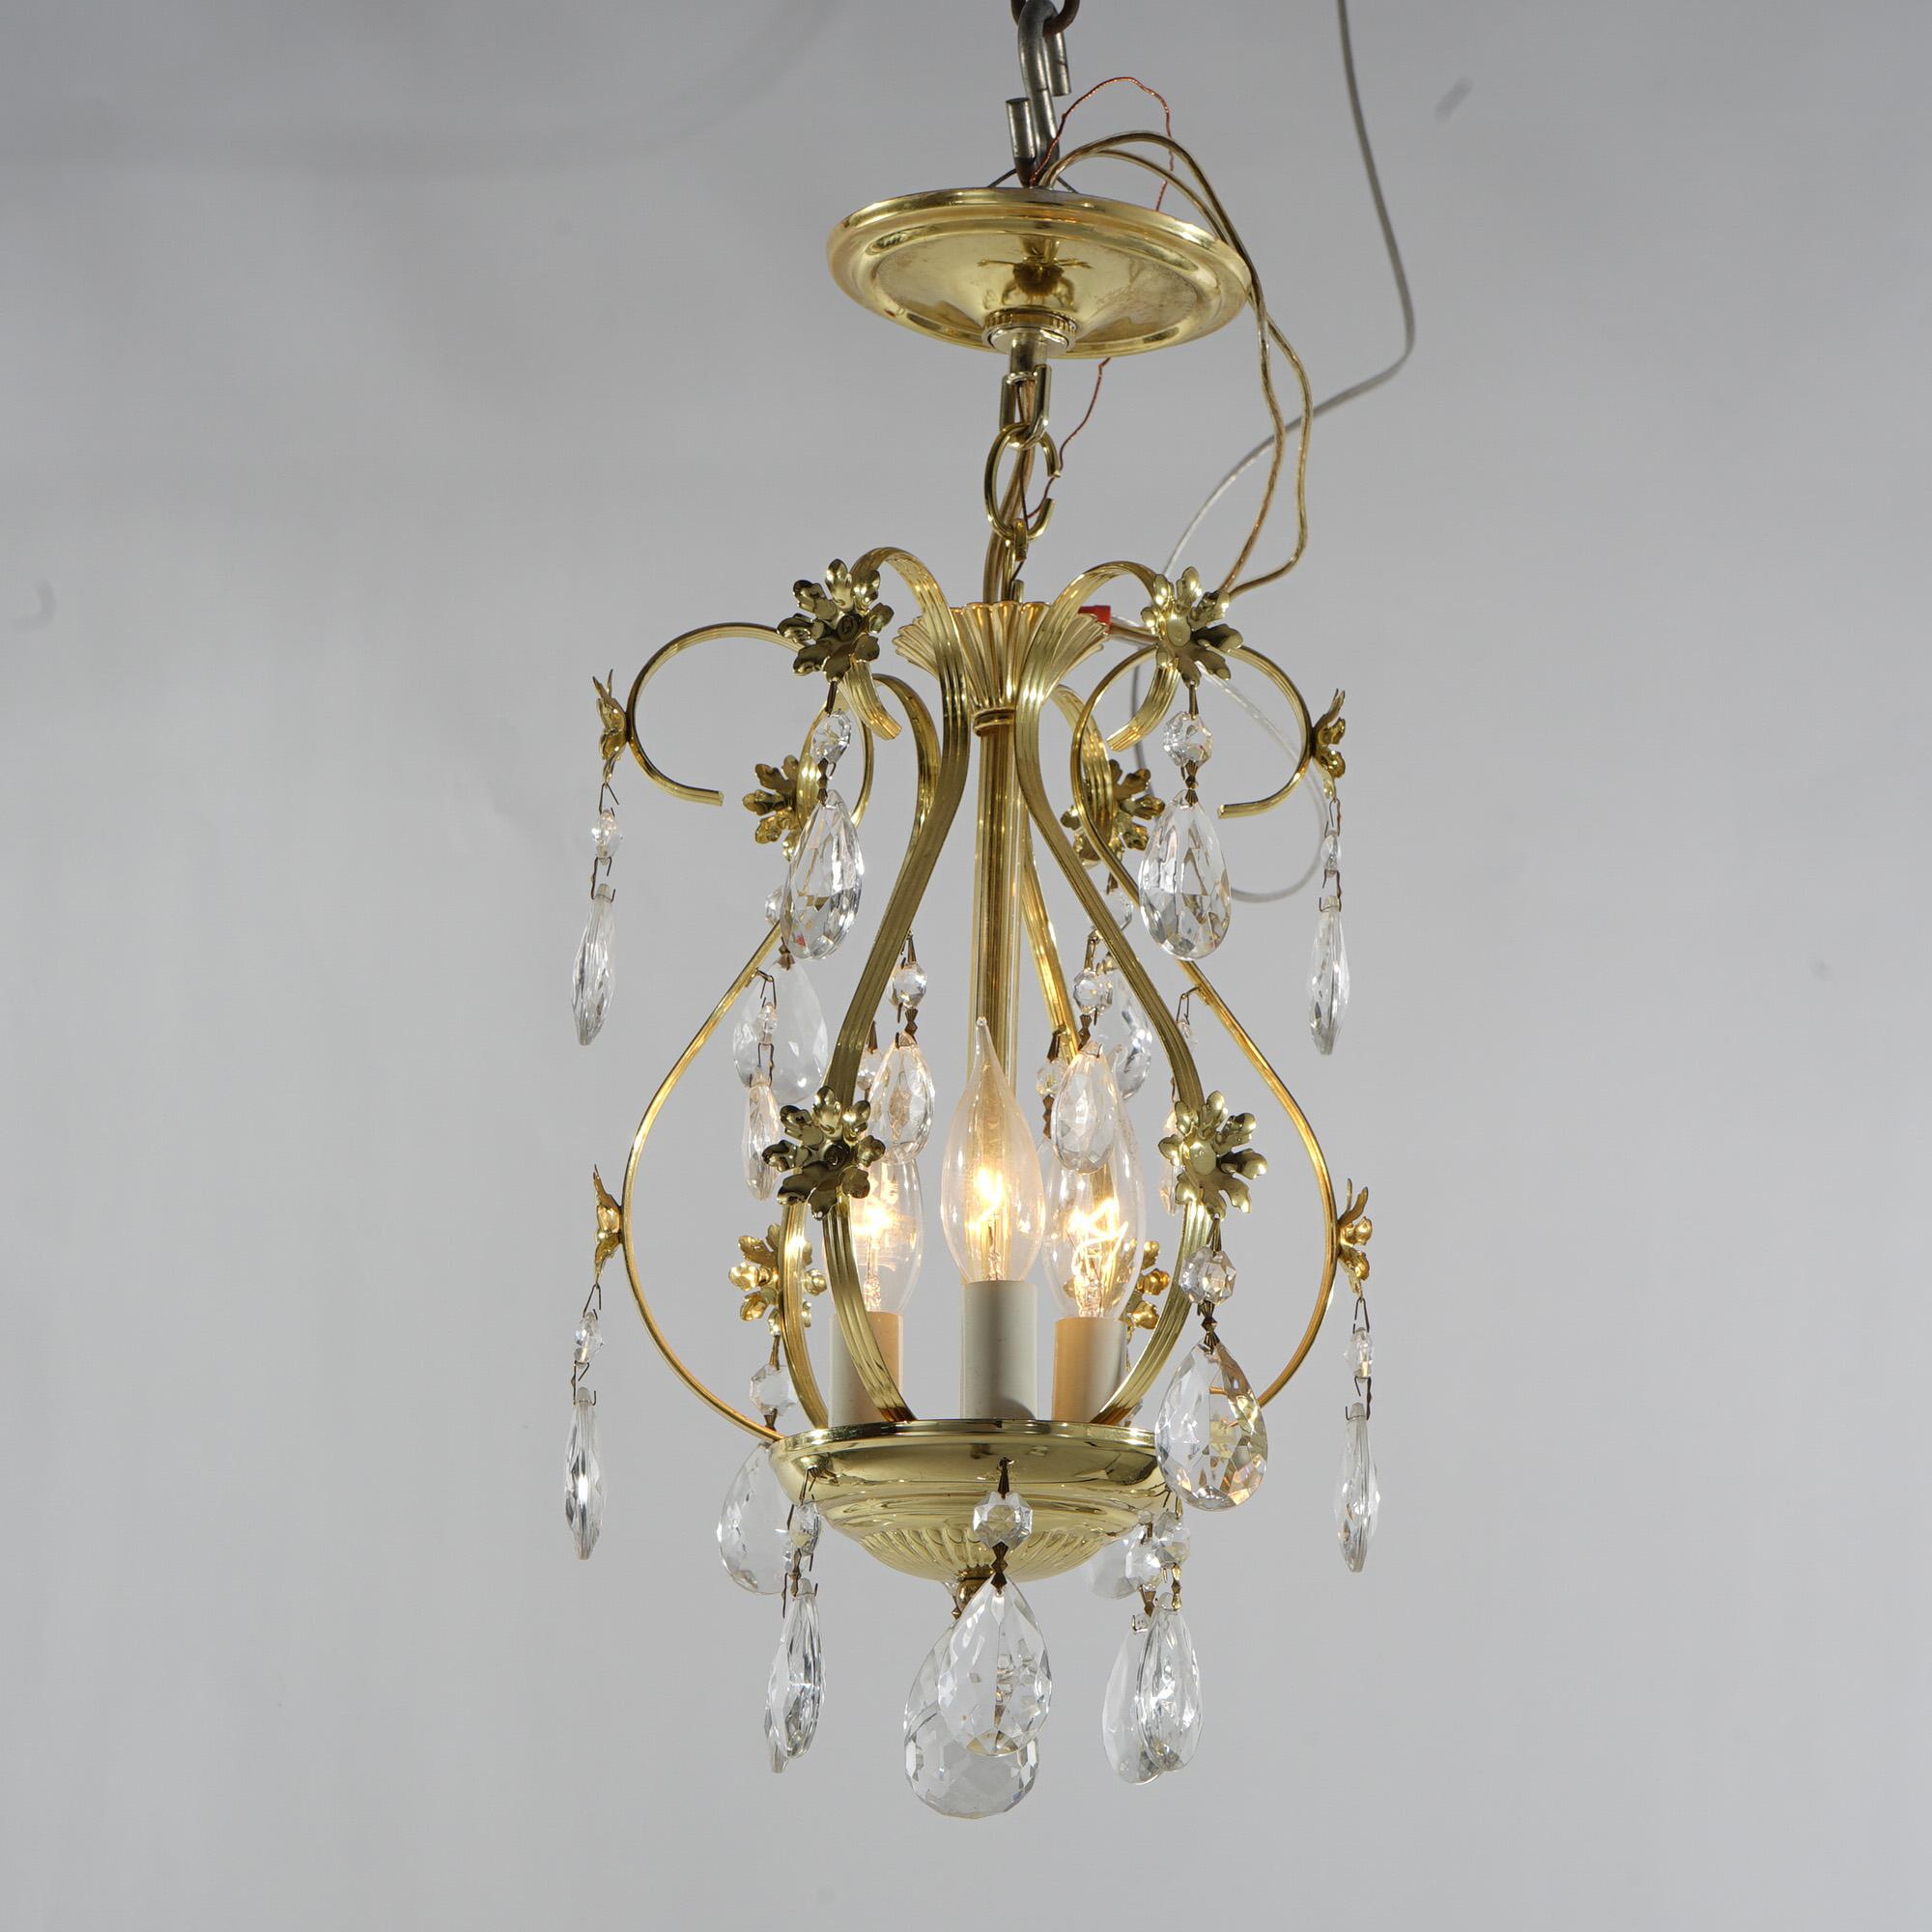 A petite chandelier offers gilt cast metal frame with three candle lights, hanging crystals, scroll and floral elements, 20thC

Measures - 20